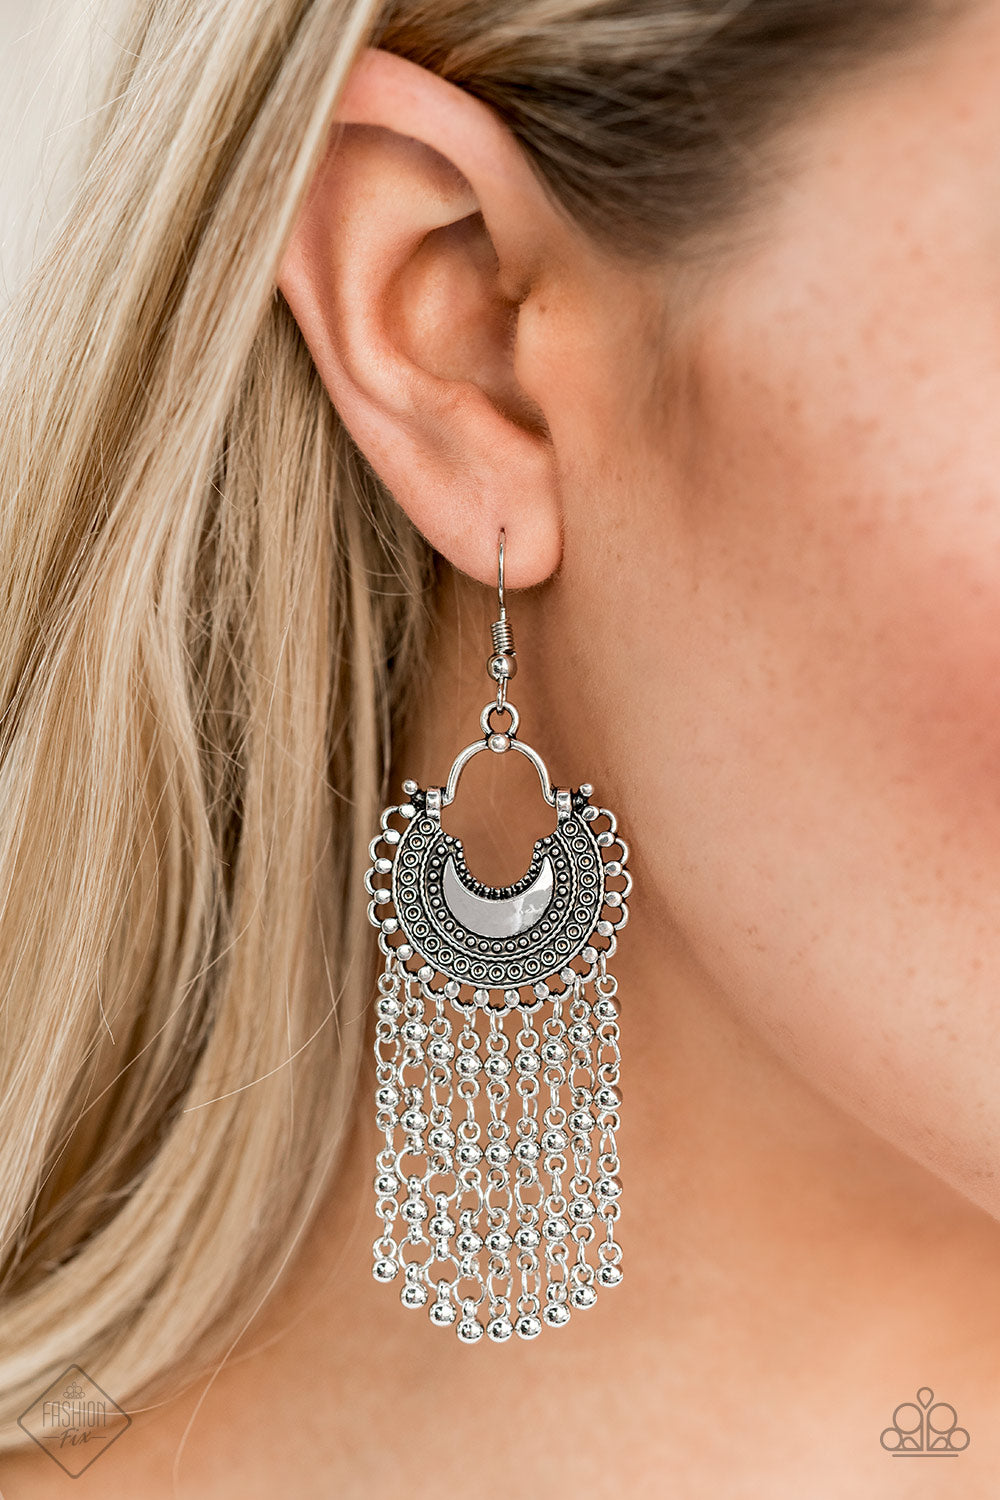 Catching Dreams Silver Earring - Paparazzi Accessories Item #E148 Beaded silver chains stream from the bottom of a textured half-moon silver frame, creating a dreamy fringe. Earring attaches to a standard fishhook fitting. All Paparazzi Accessories are lead free and nickel free!  Sold as one pair of earrings.